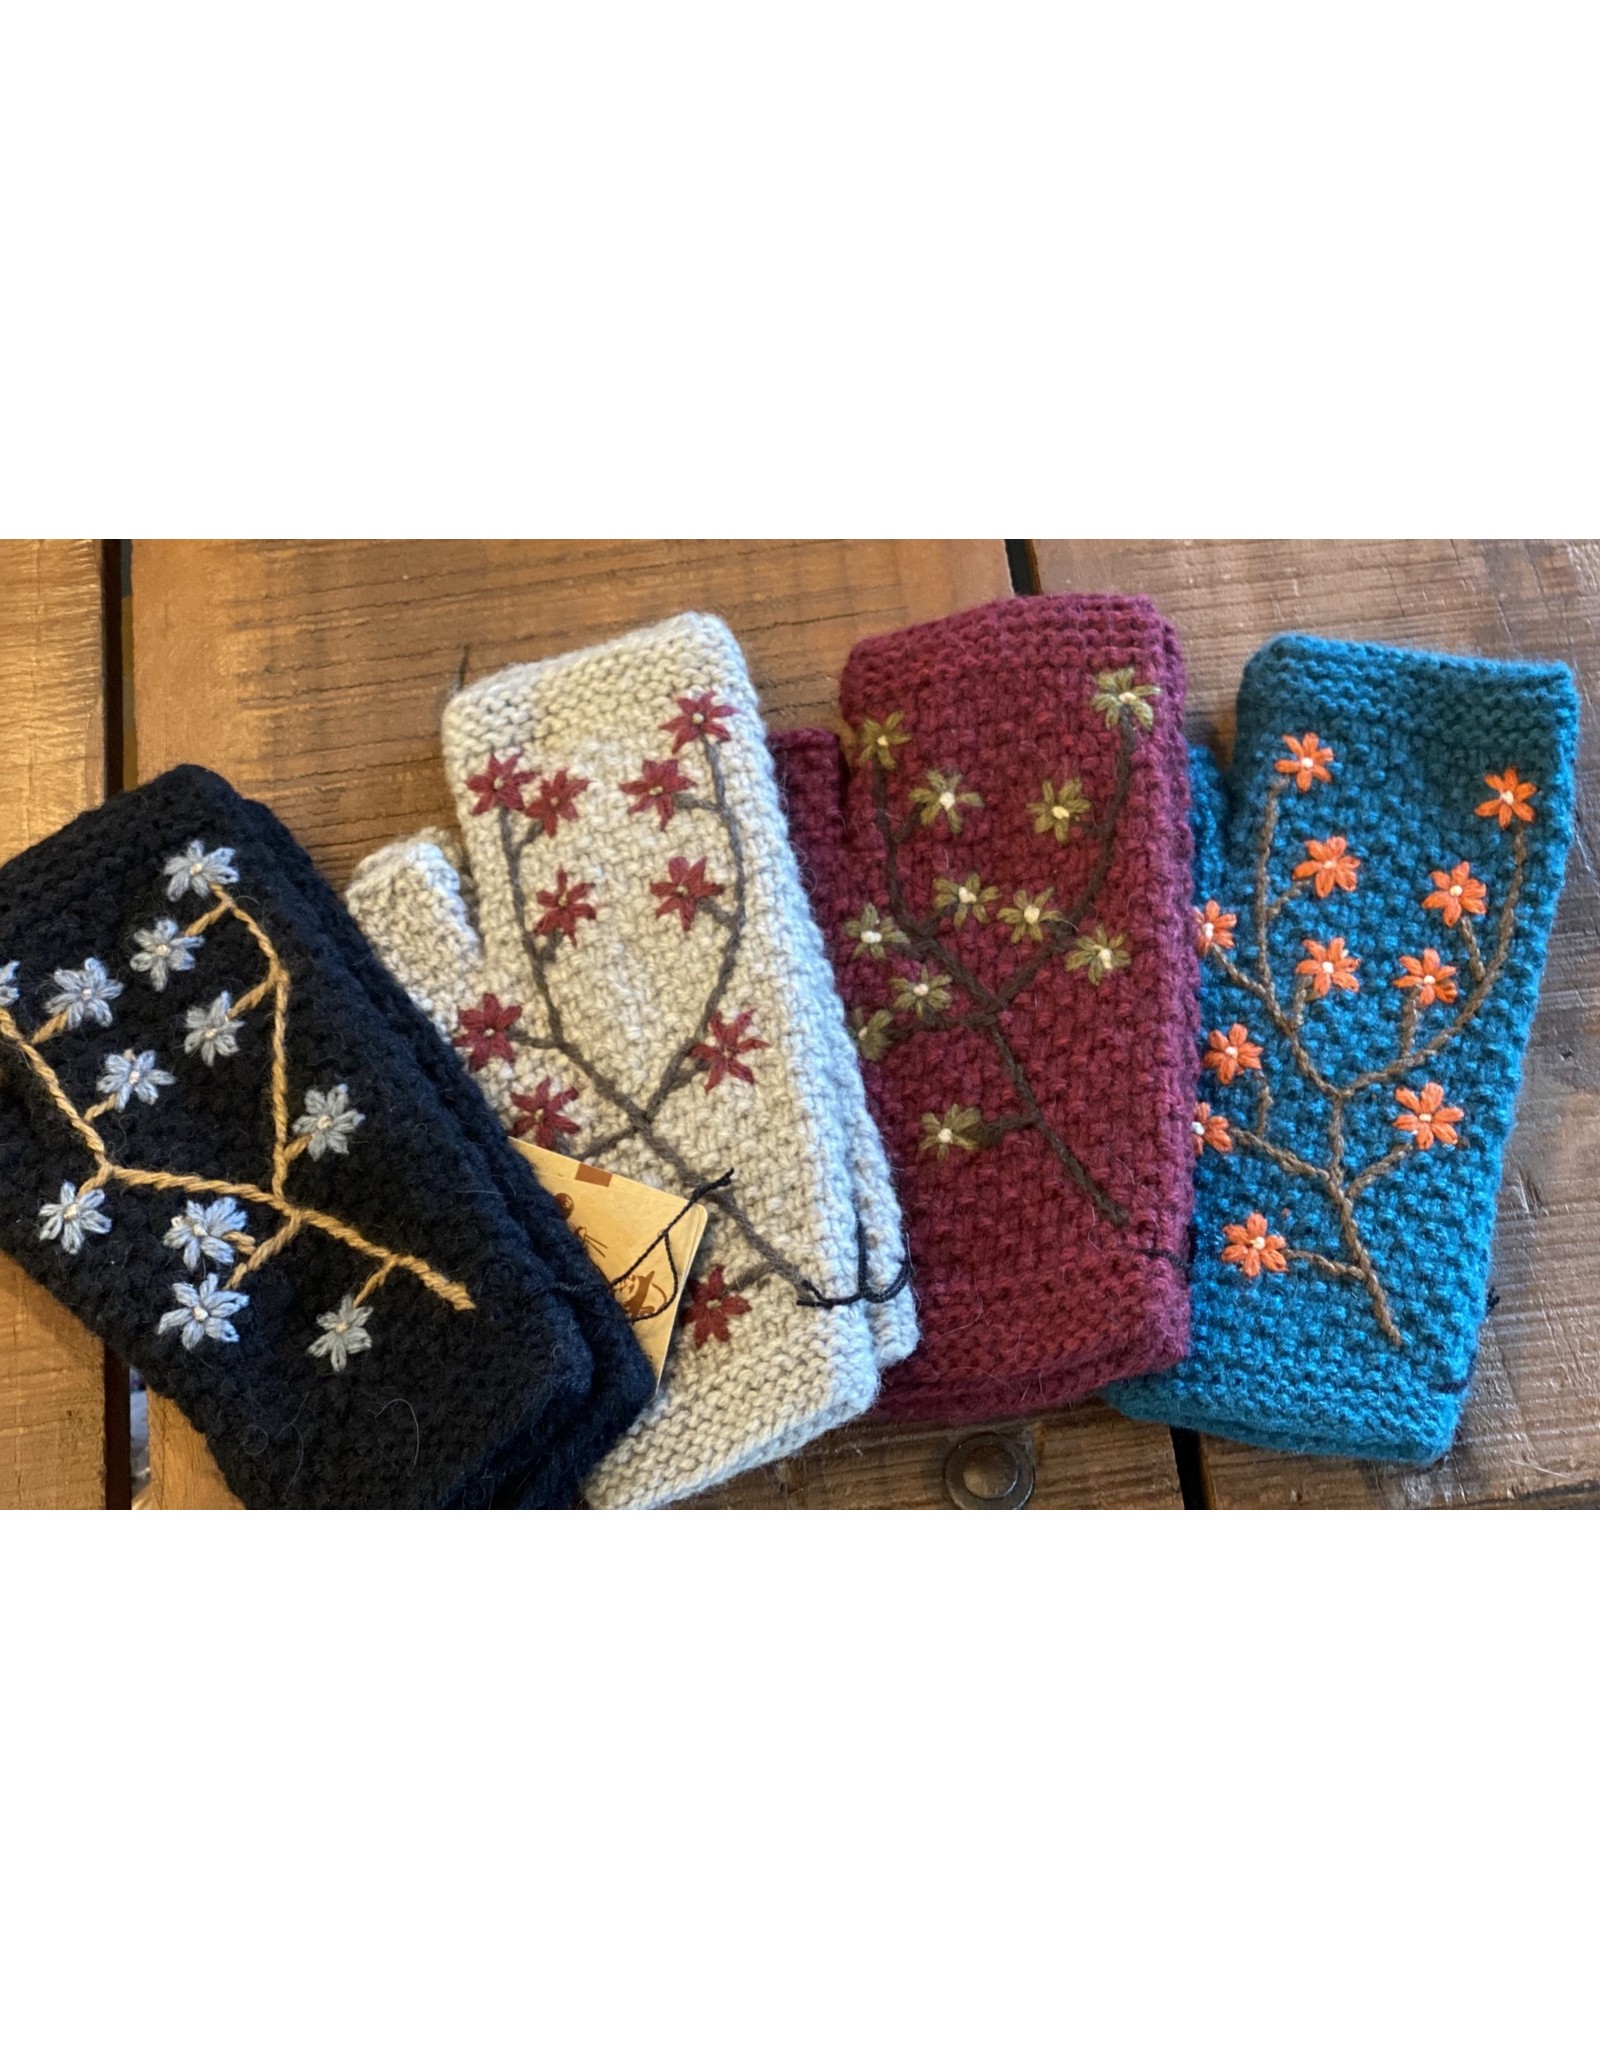 Trade roots Embroidered Armwarmers